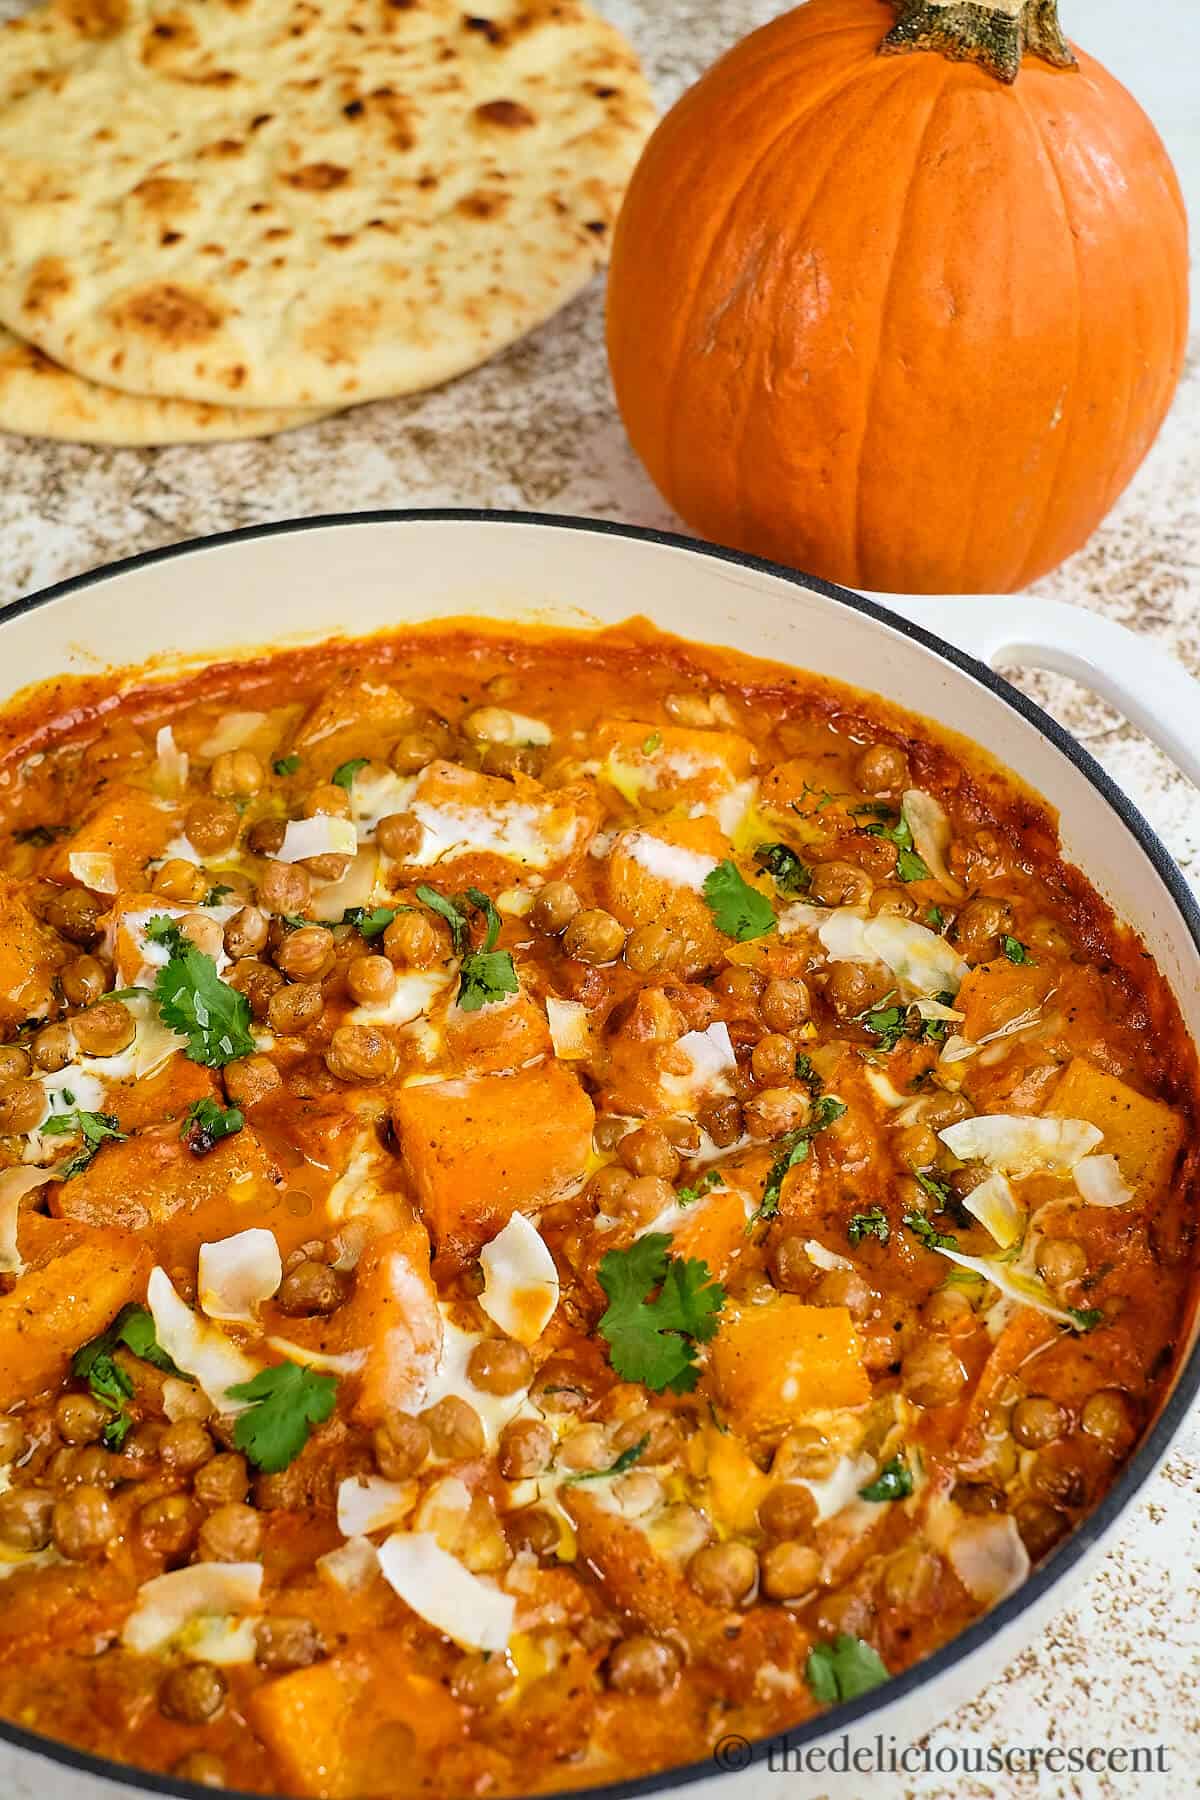 Pumpkin curry with chickpeas and coconut served in a casserole dish.